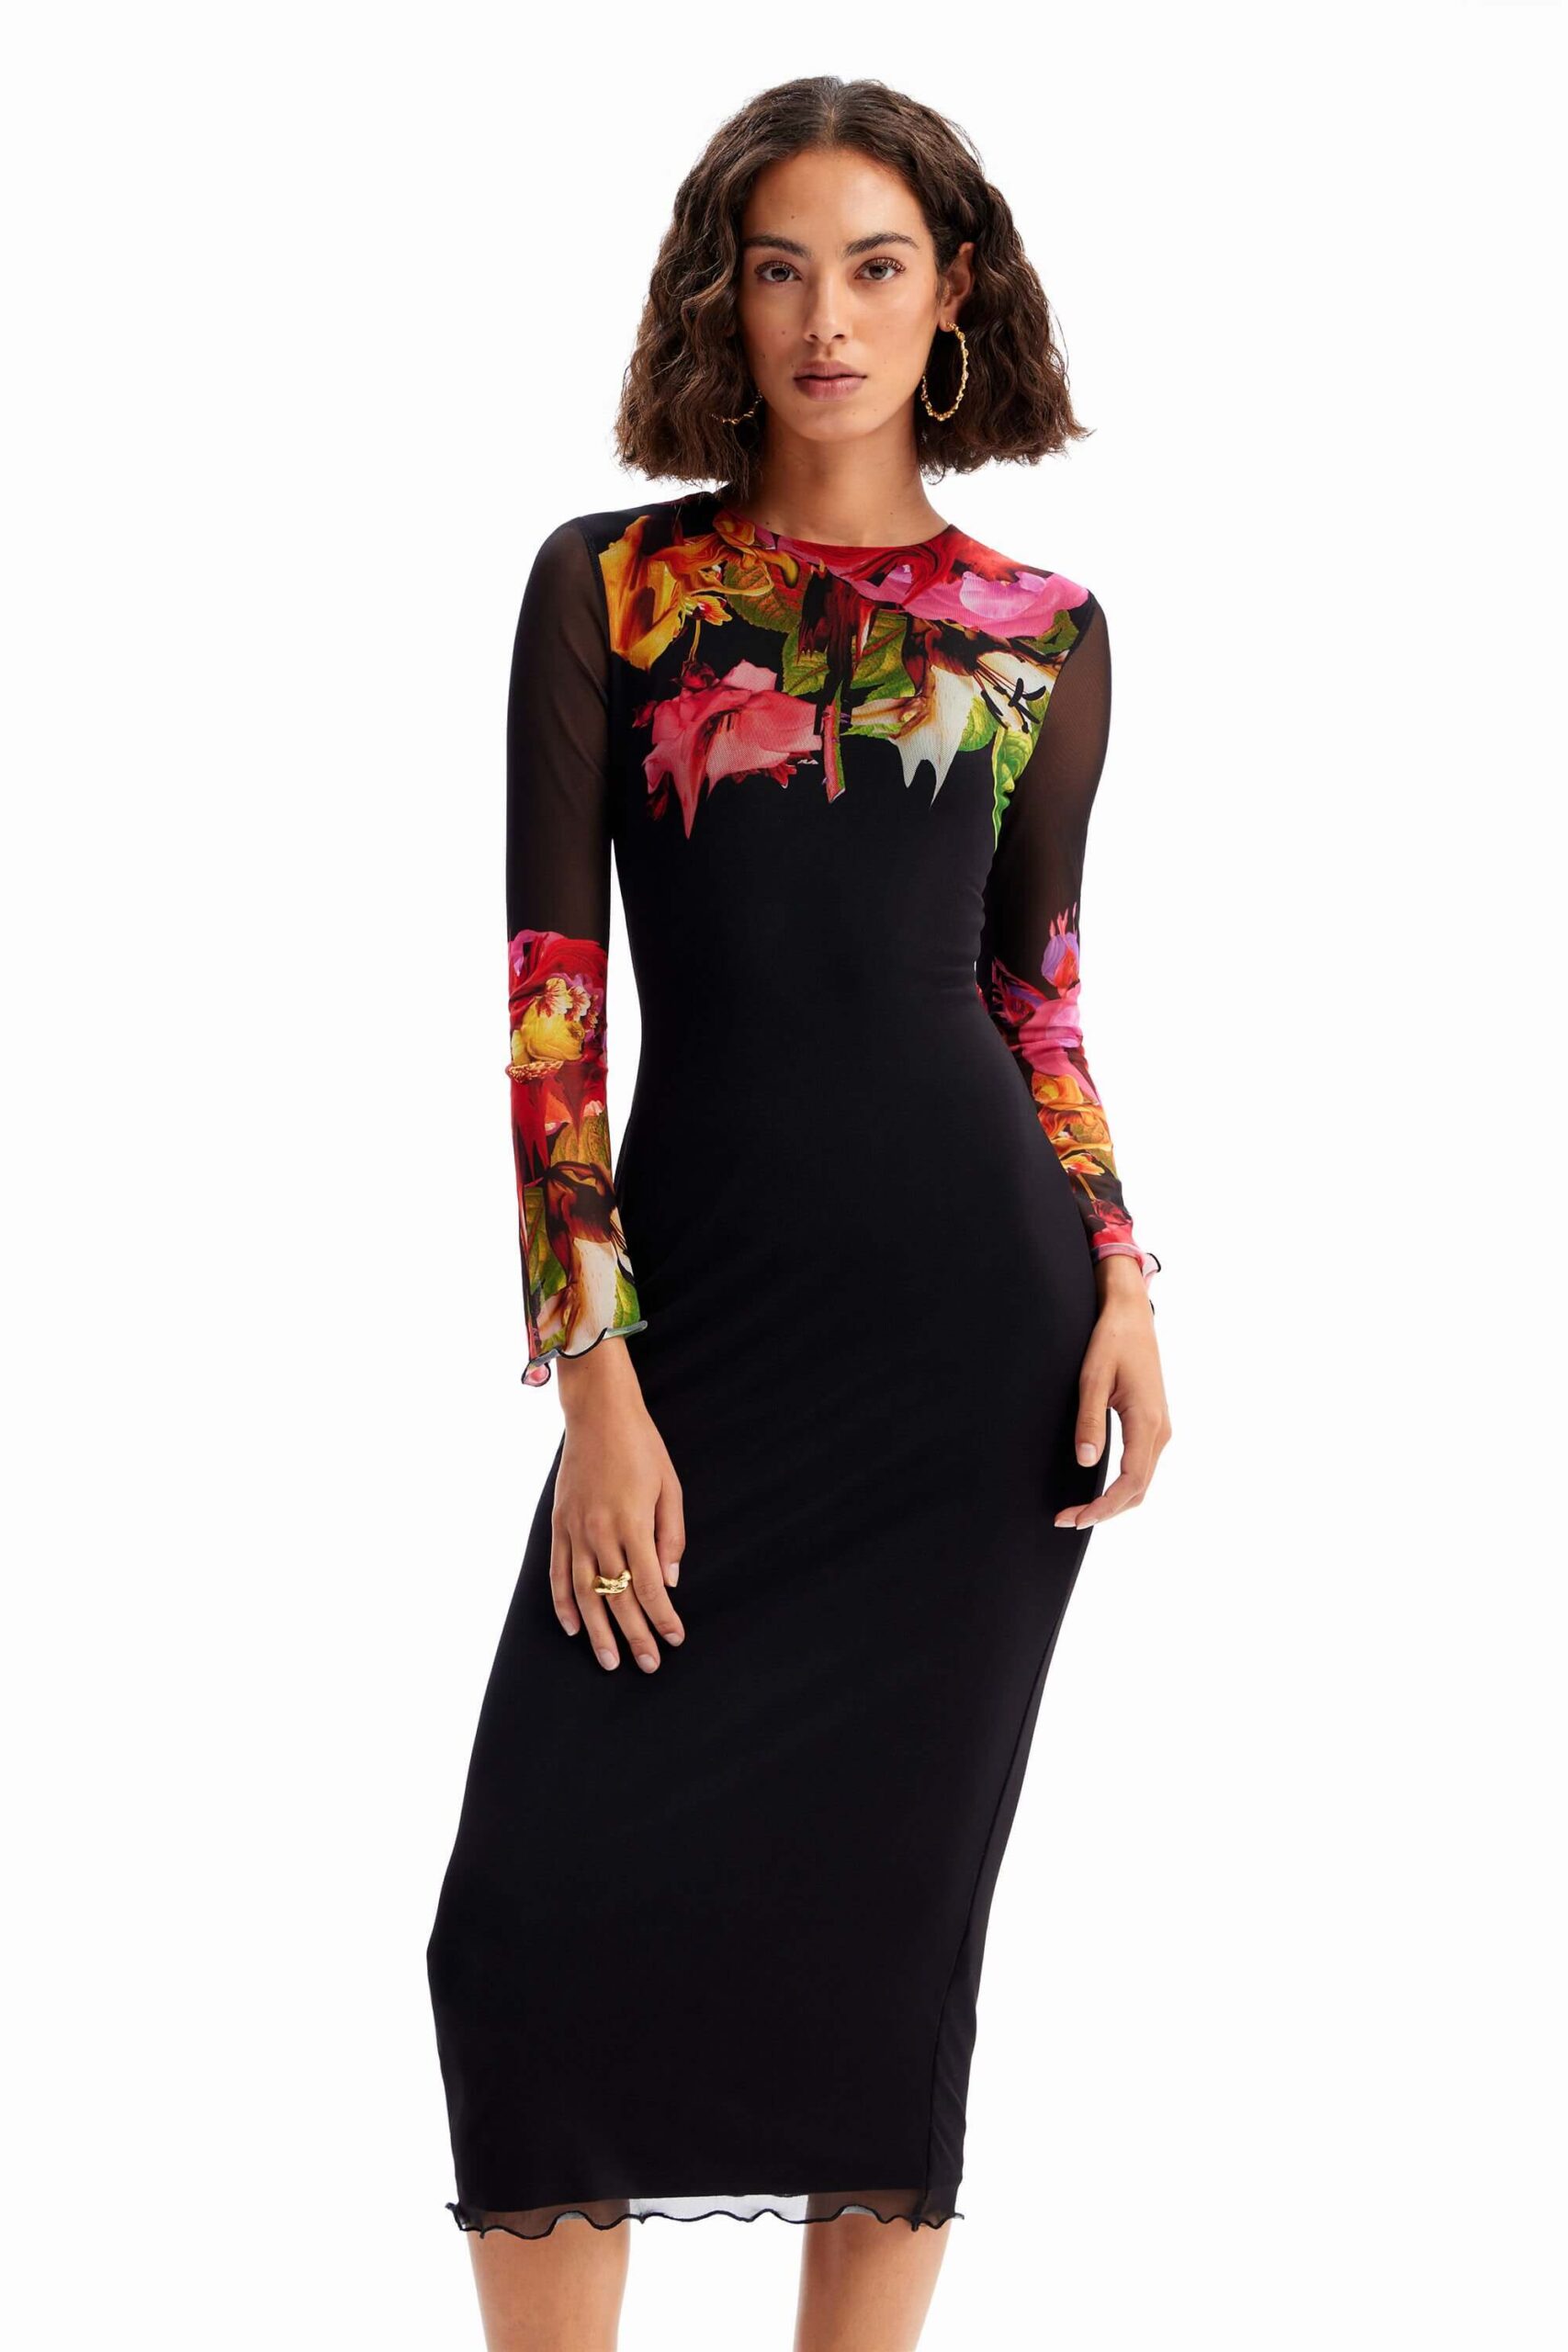 M. Christian Lacroix floral tulle dress Discounts and Cashback